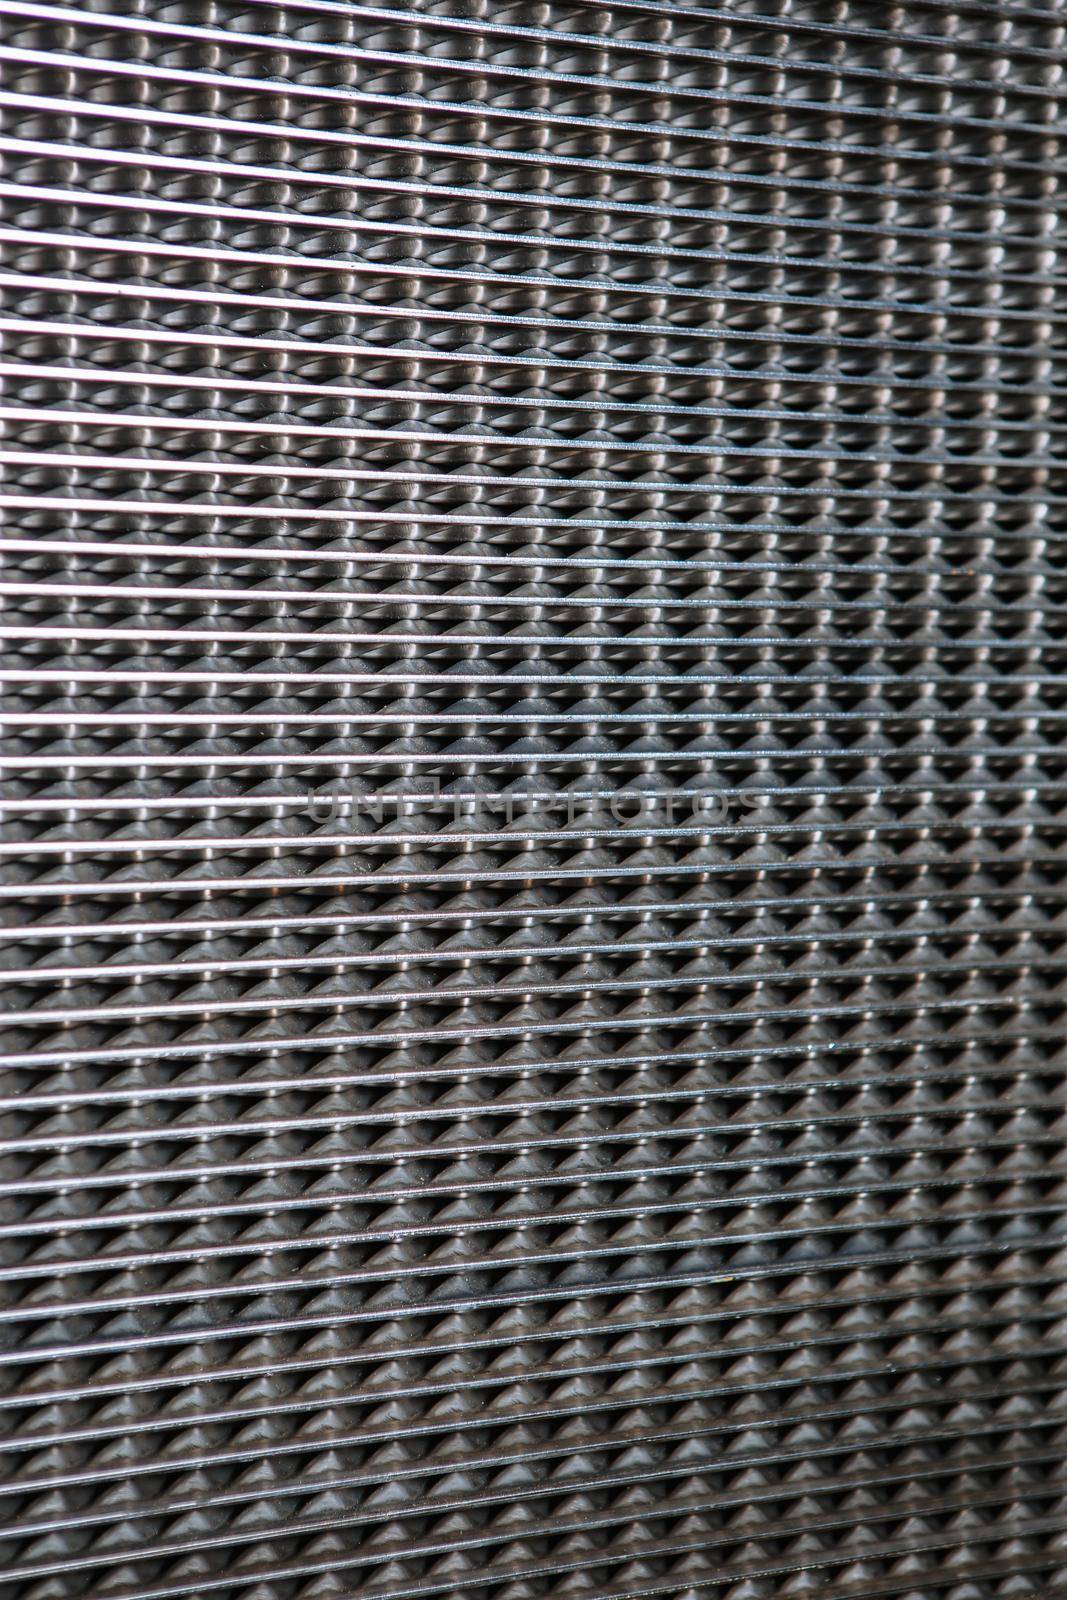 A metal heat exchanger grid consisting of small cells.